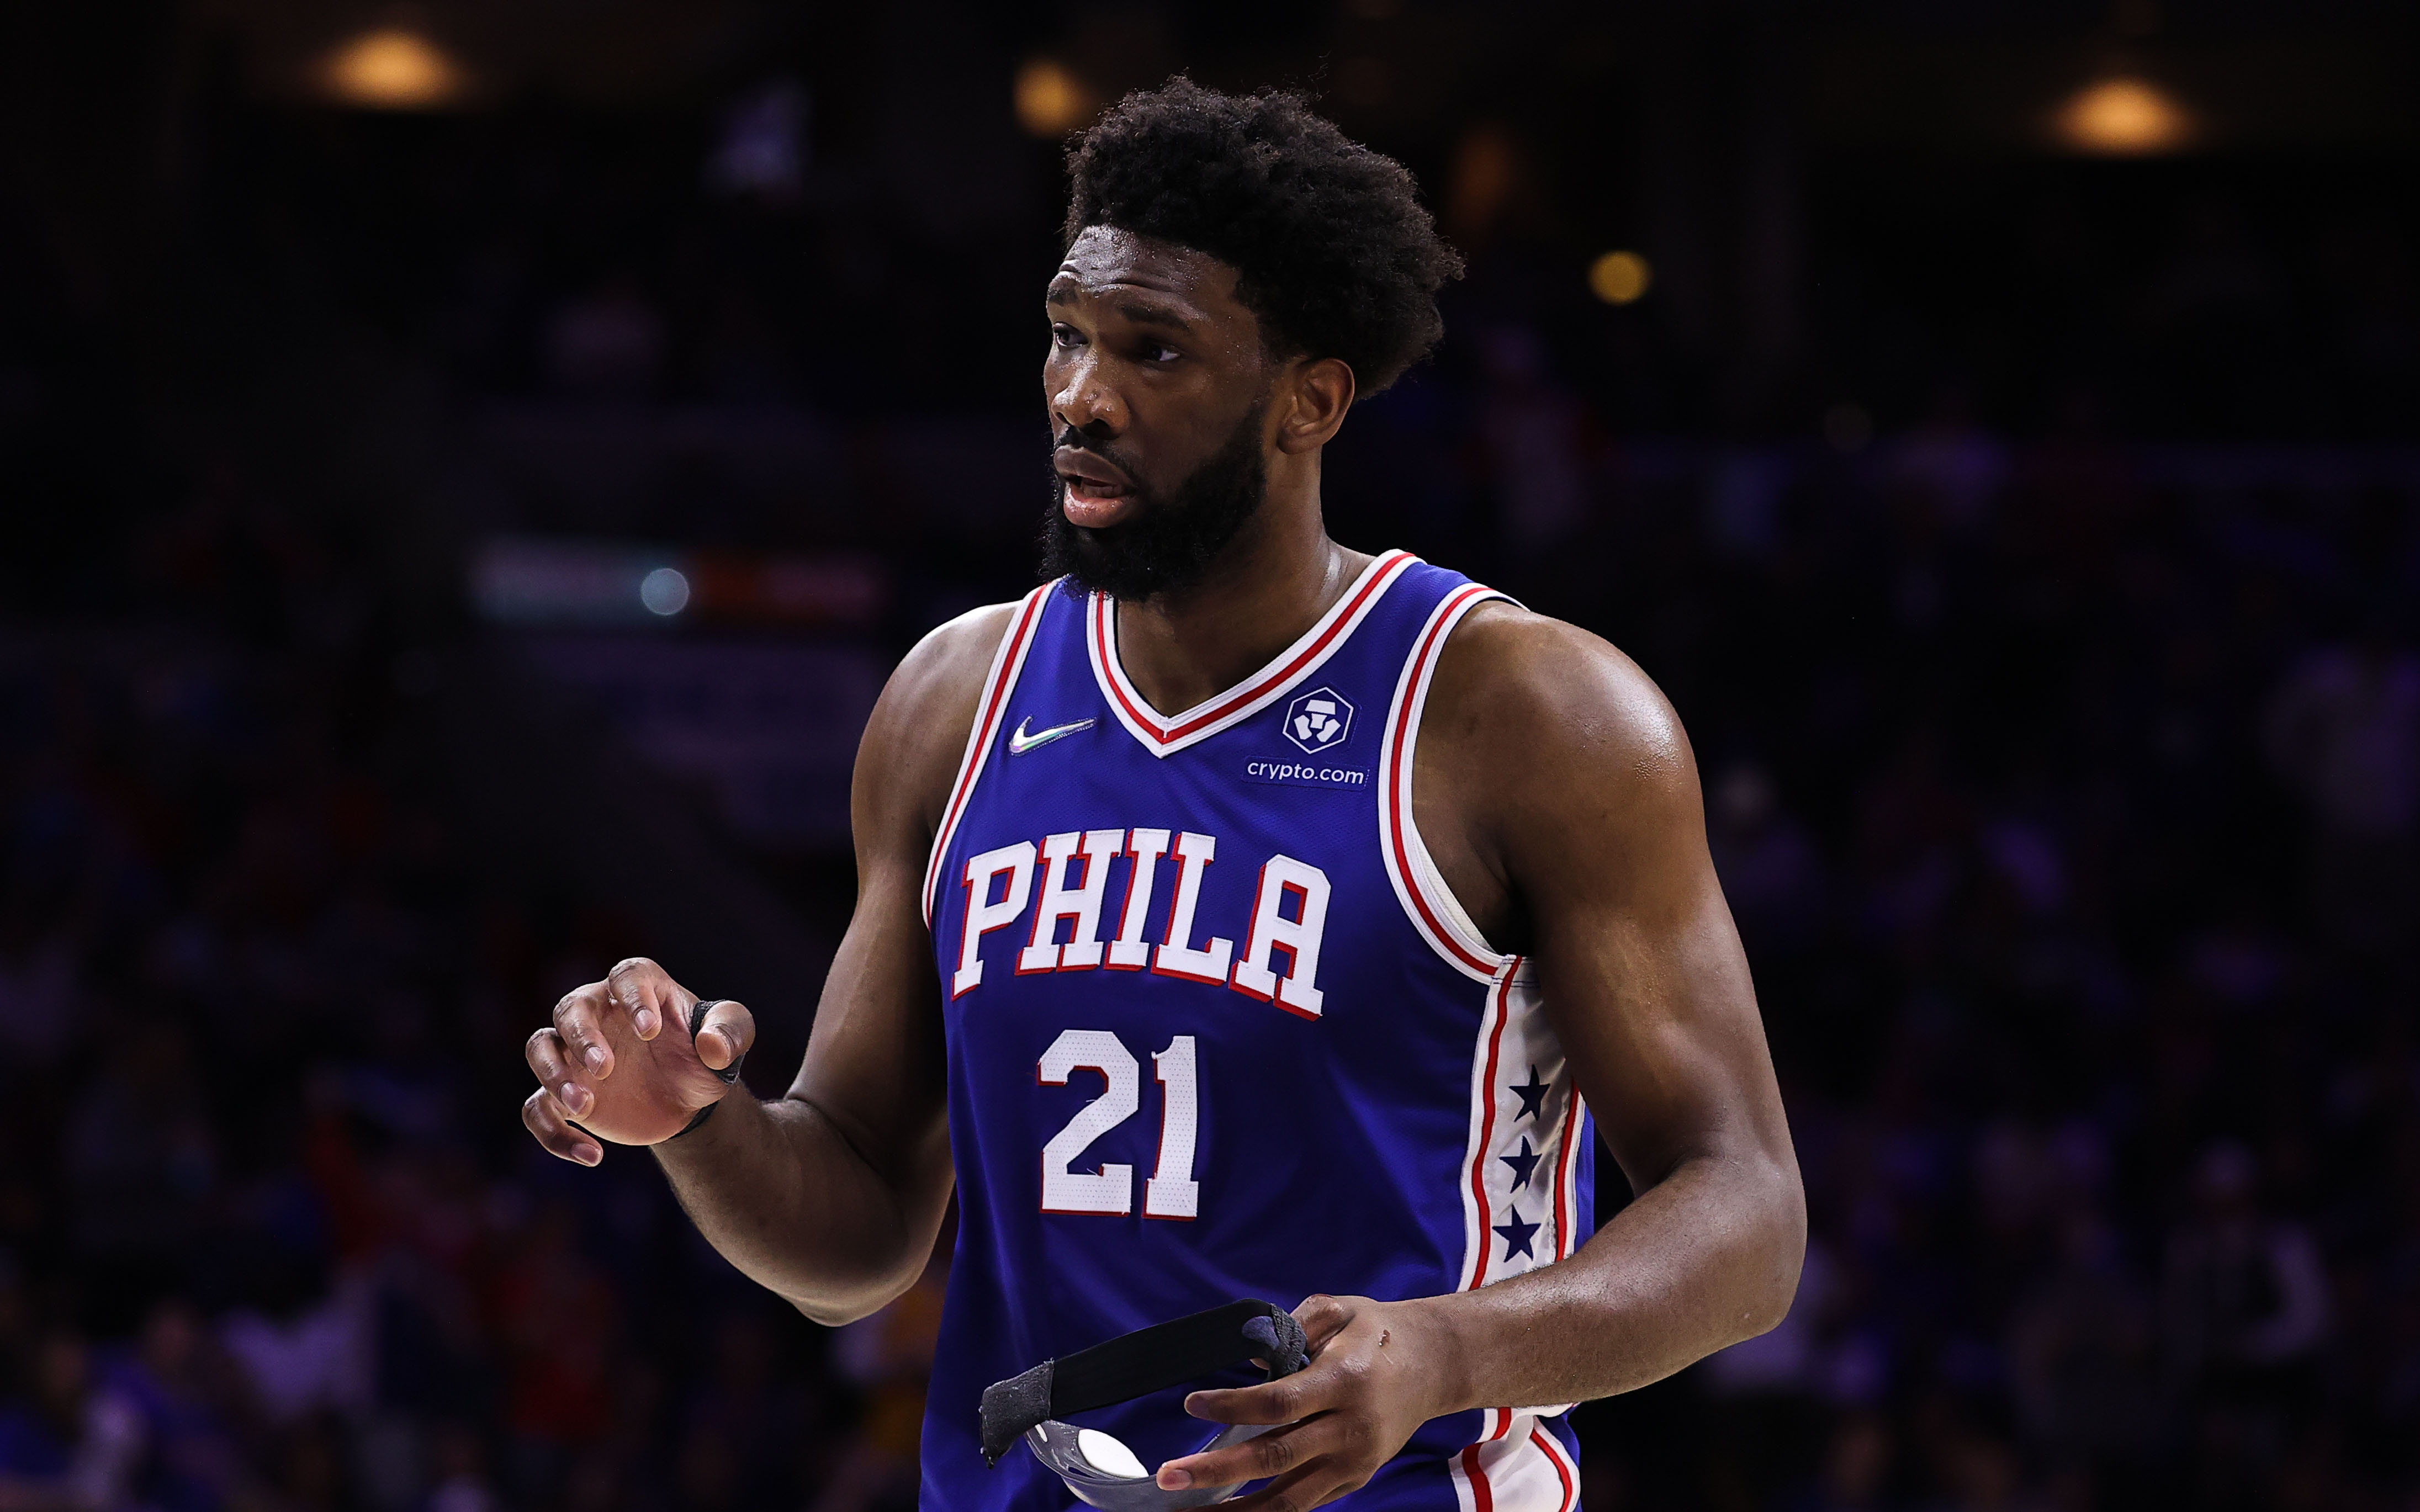 Sixers center Joel Embiid named NBA MVP. See his season in photos